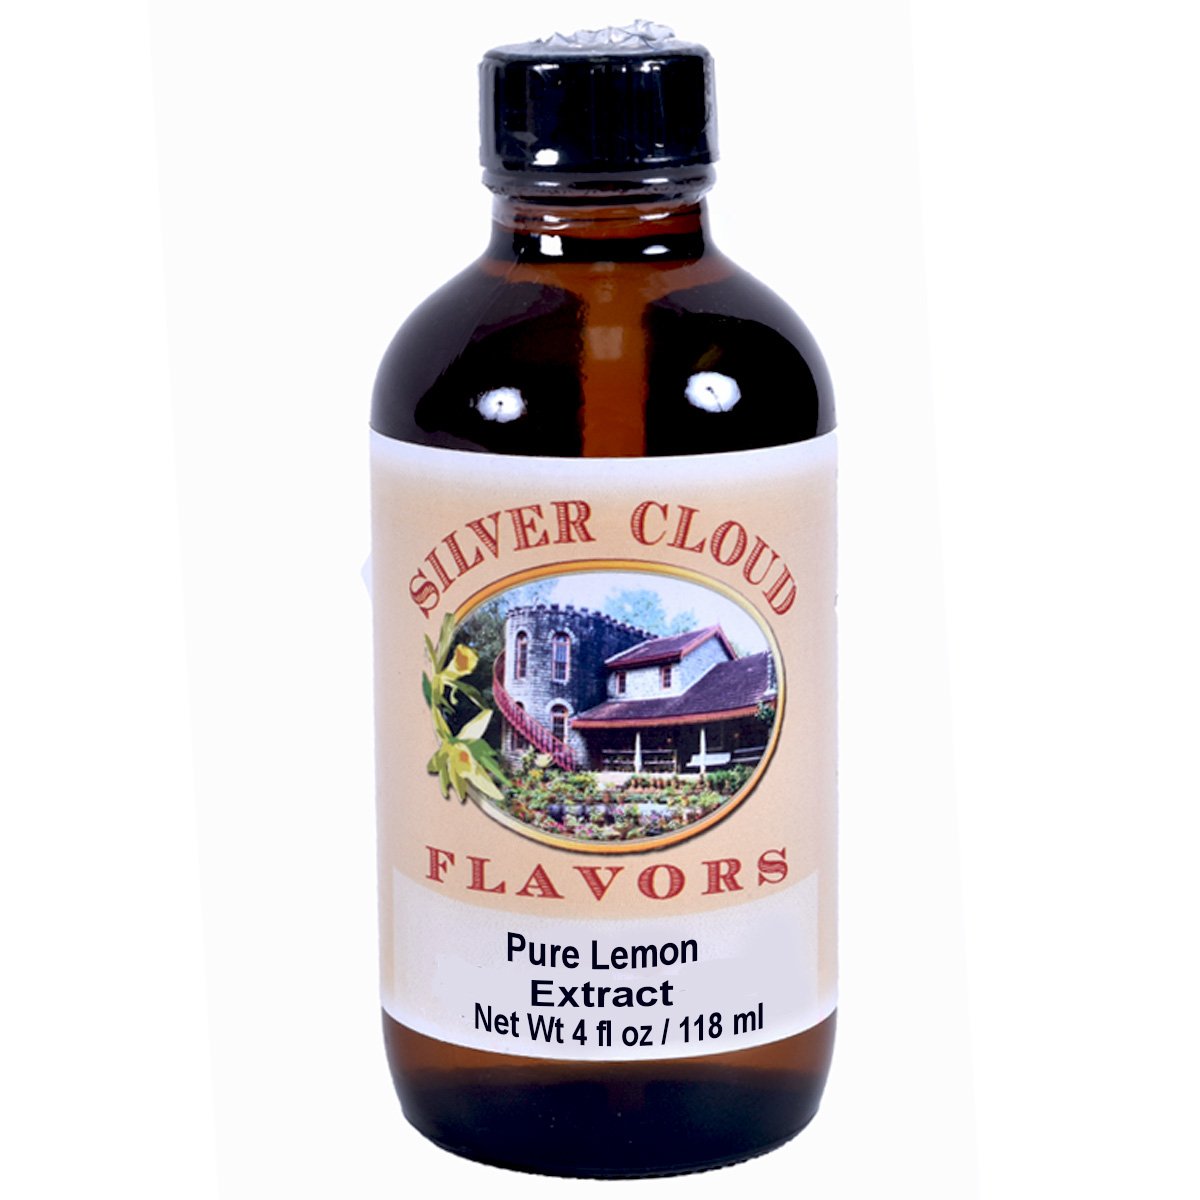 Pure Lemon Extract Silver Cloud Extract - Bake Supply Plus